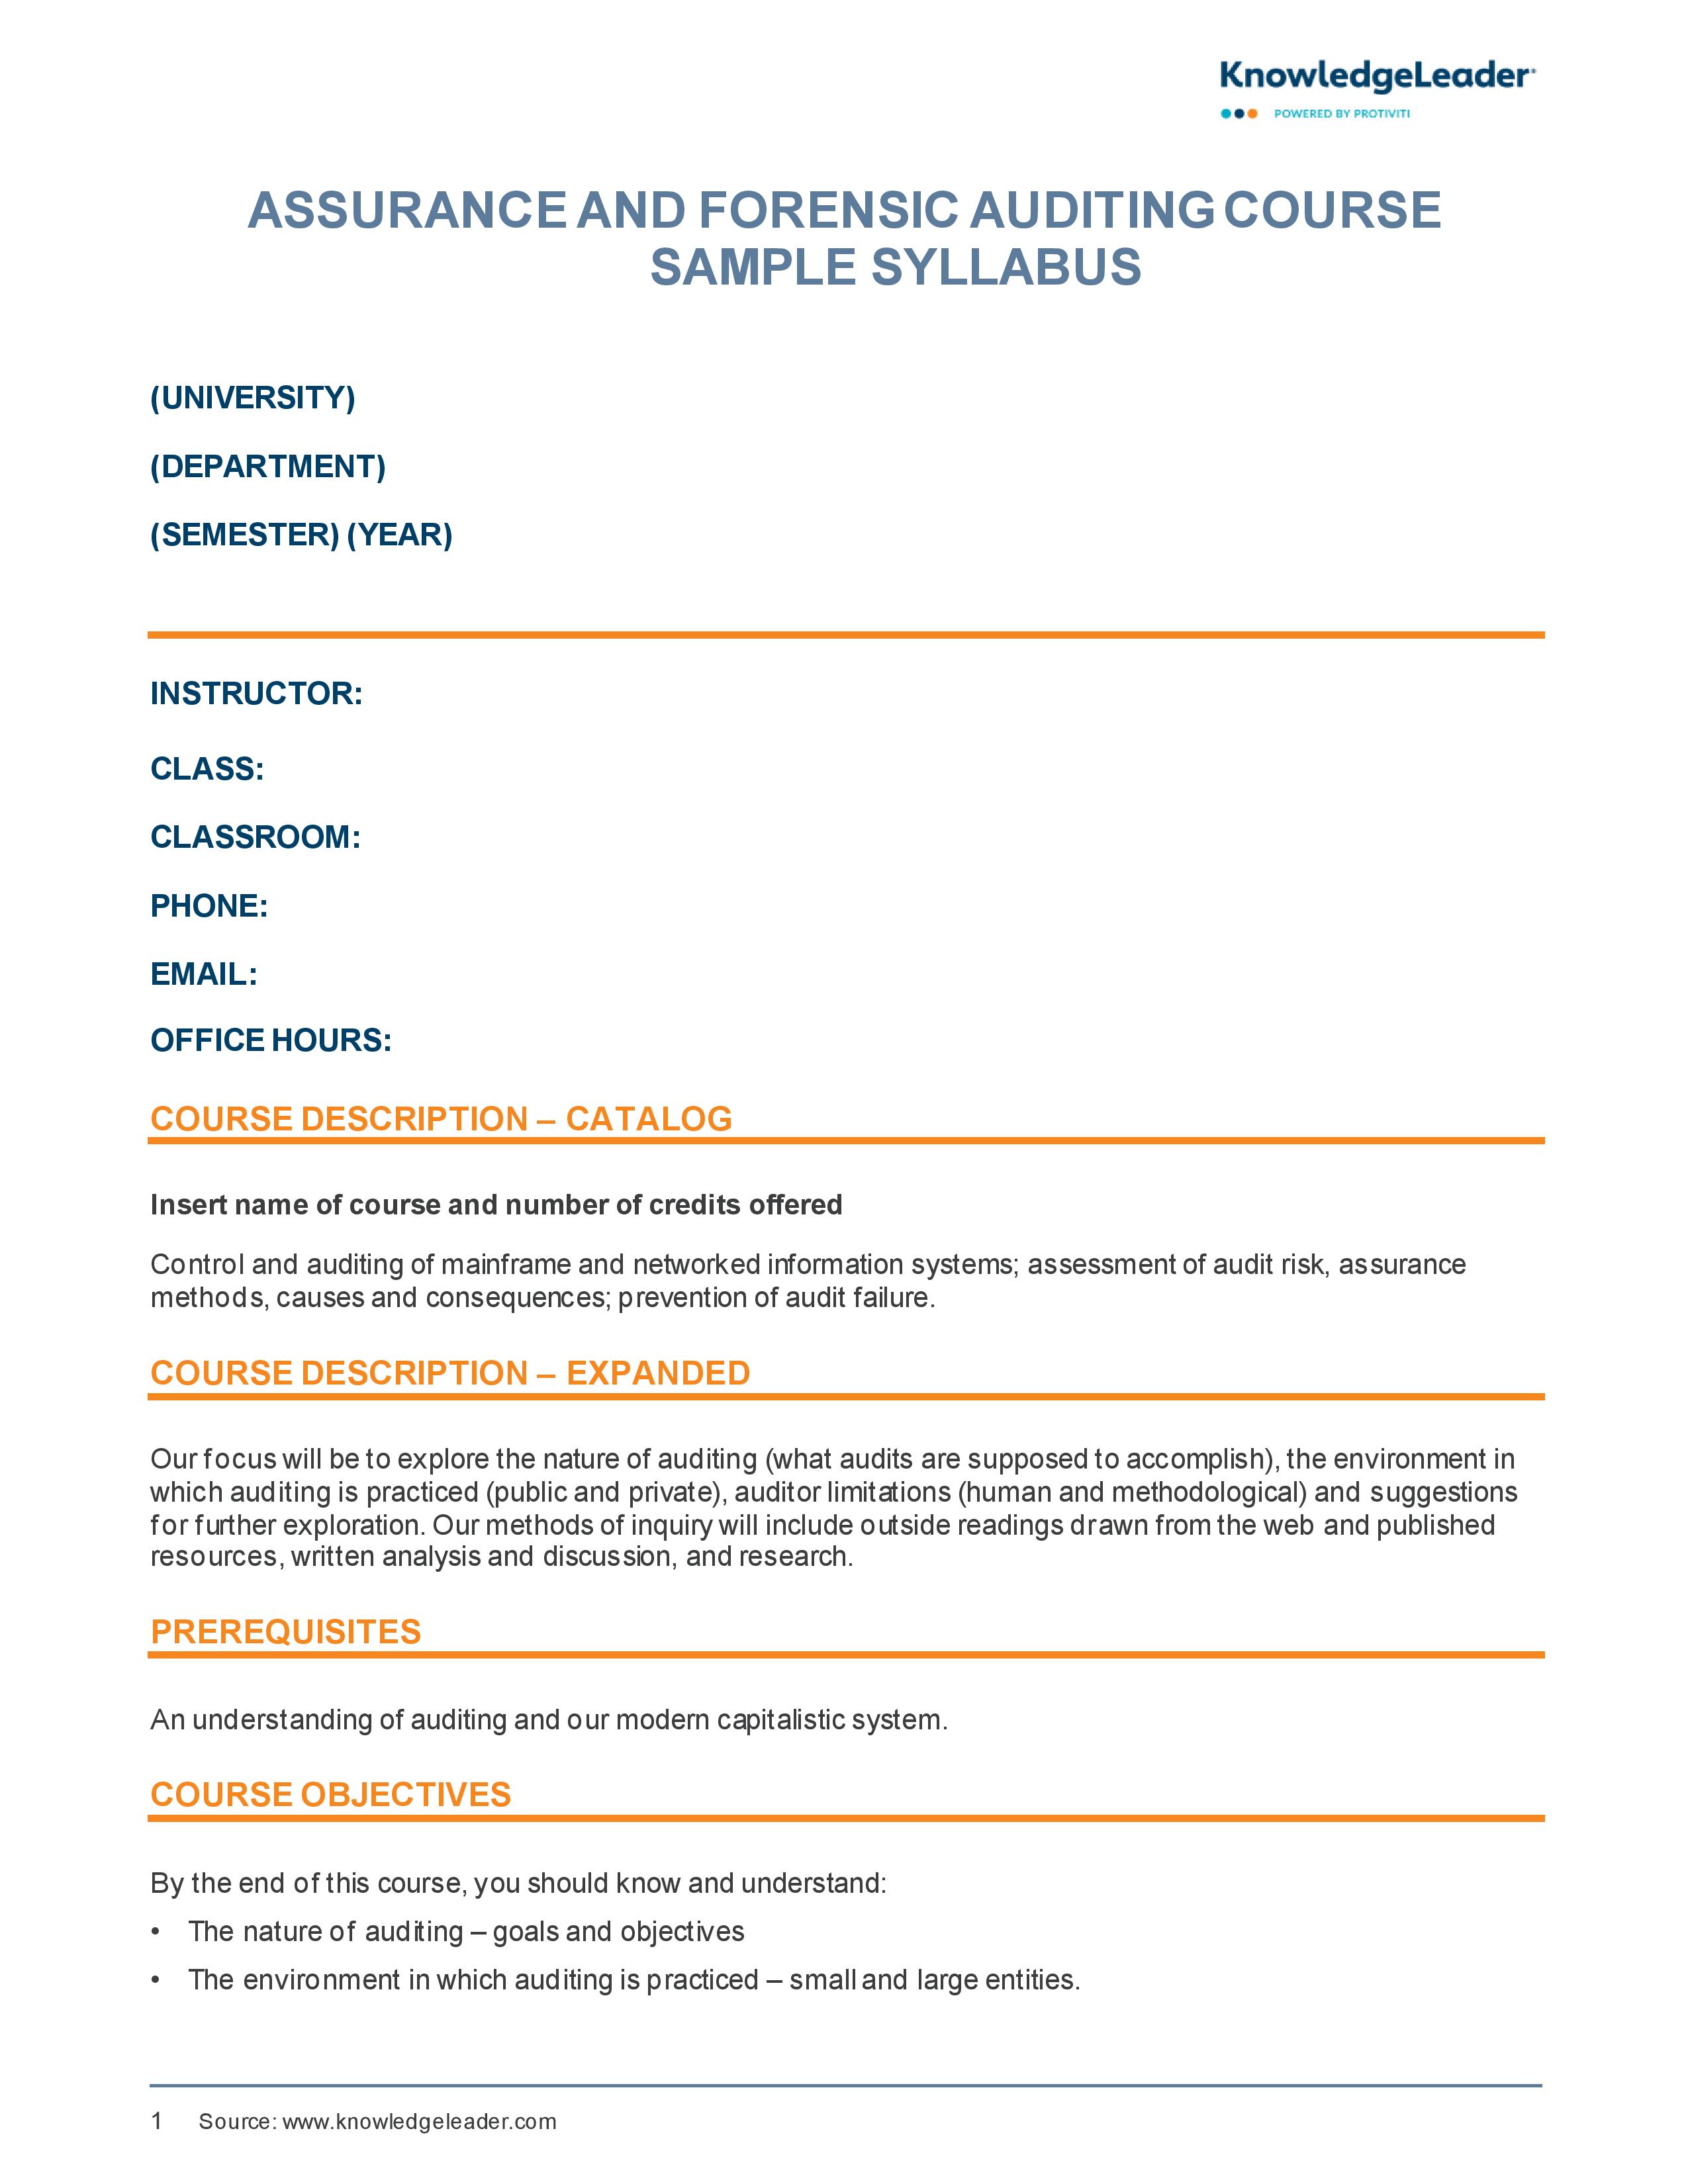 Screenshot of the first page of Assurance and Forensic Auditing Sample Syllabus